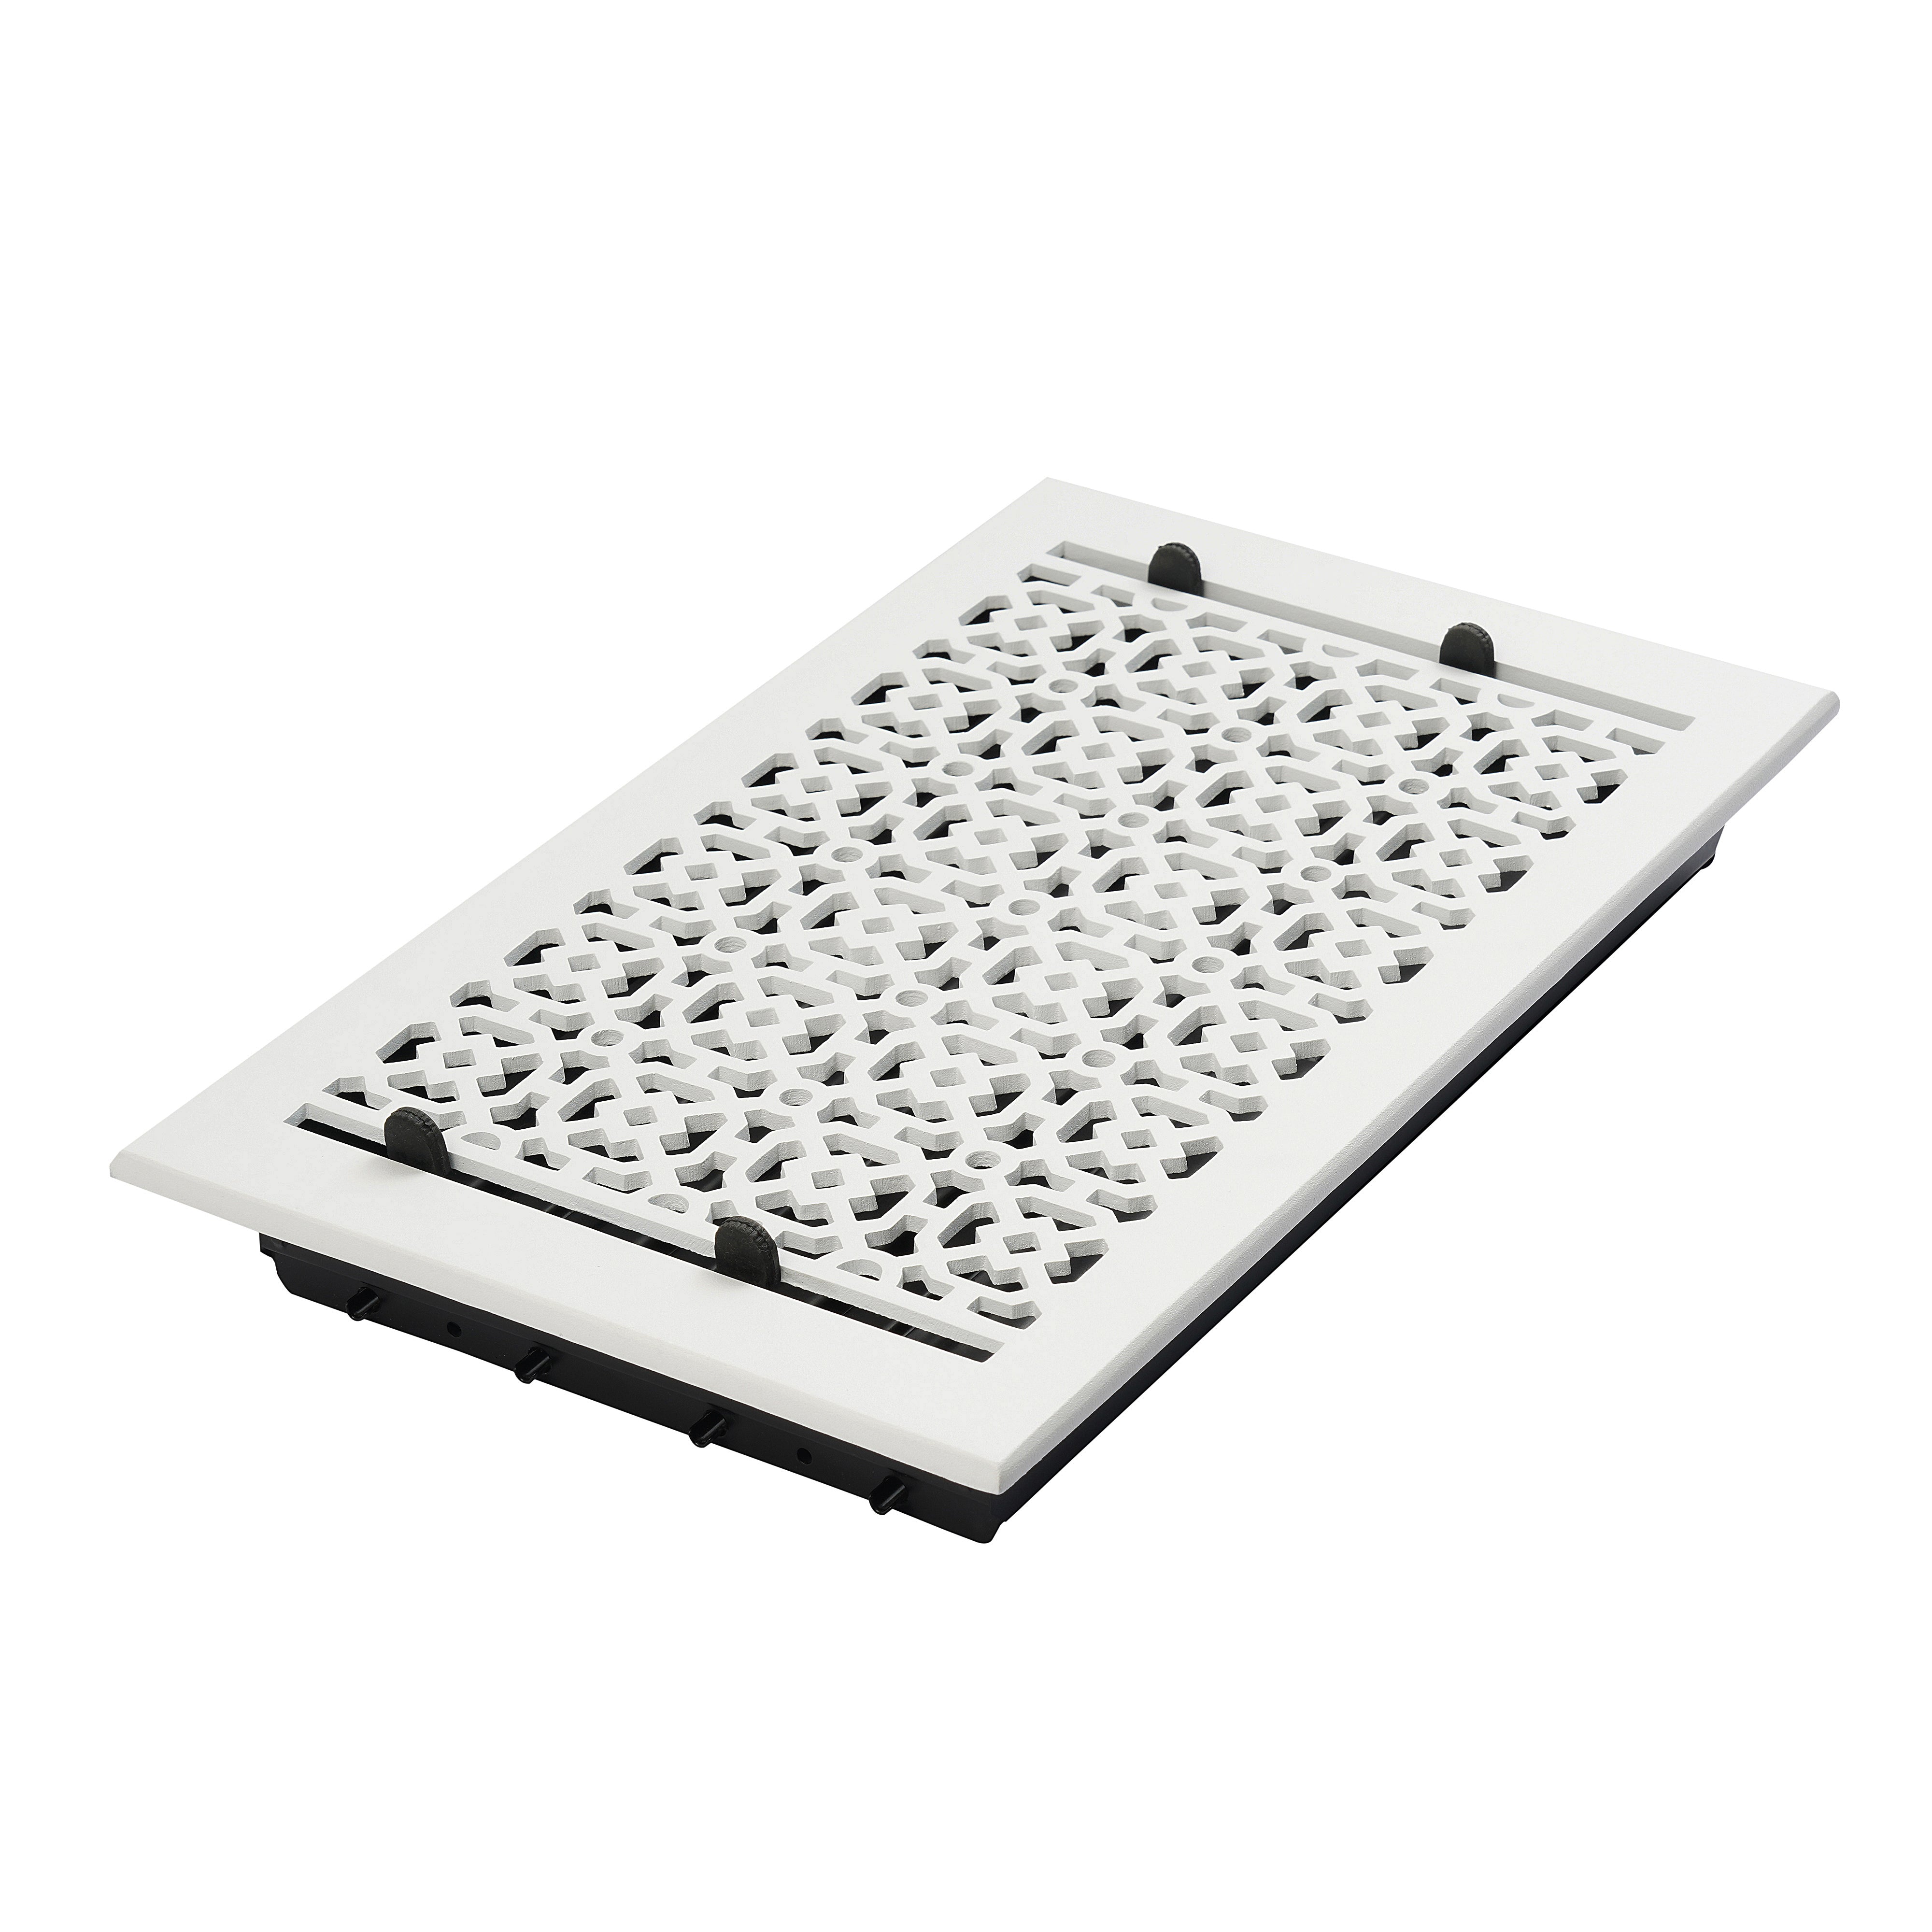 Achtek Air Supply Vent 8"x 8" Duct Opening (Overall 9-1/2"x 9-1/2") Solid Cast Aluminium Register Cover | Powder Coated